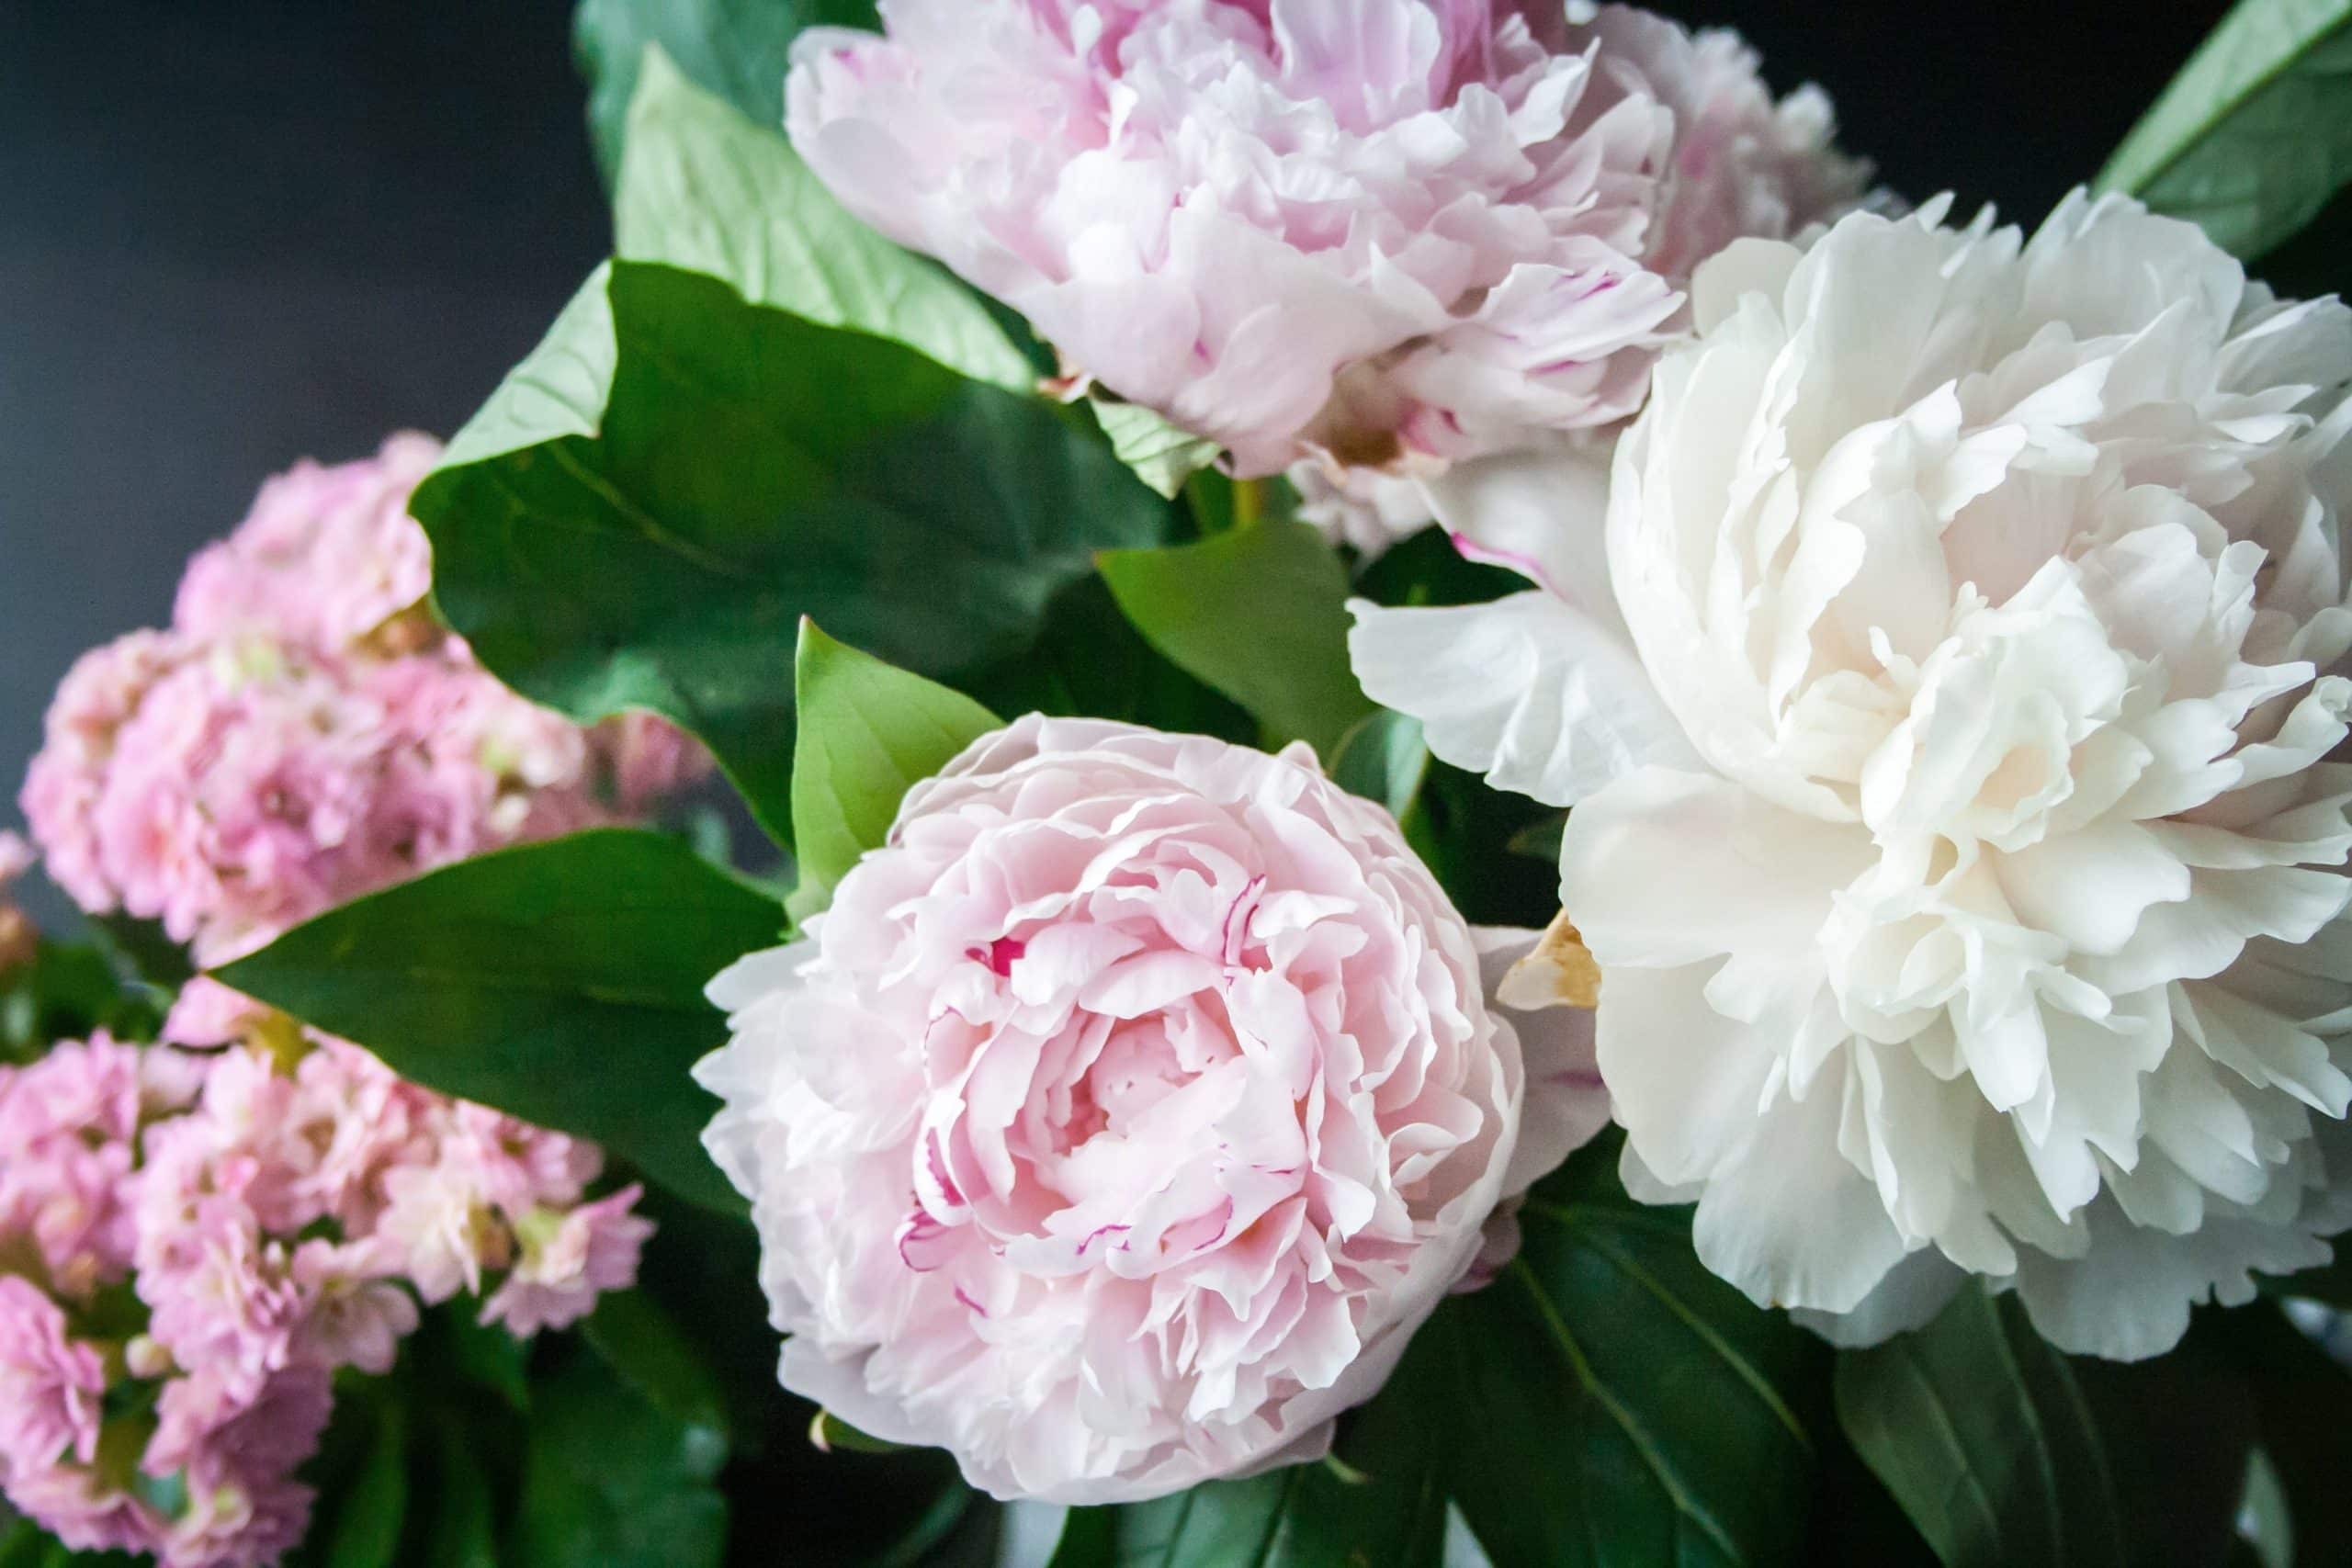 pink and white peonies